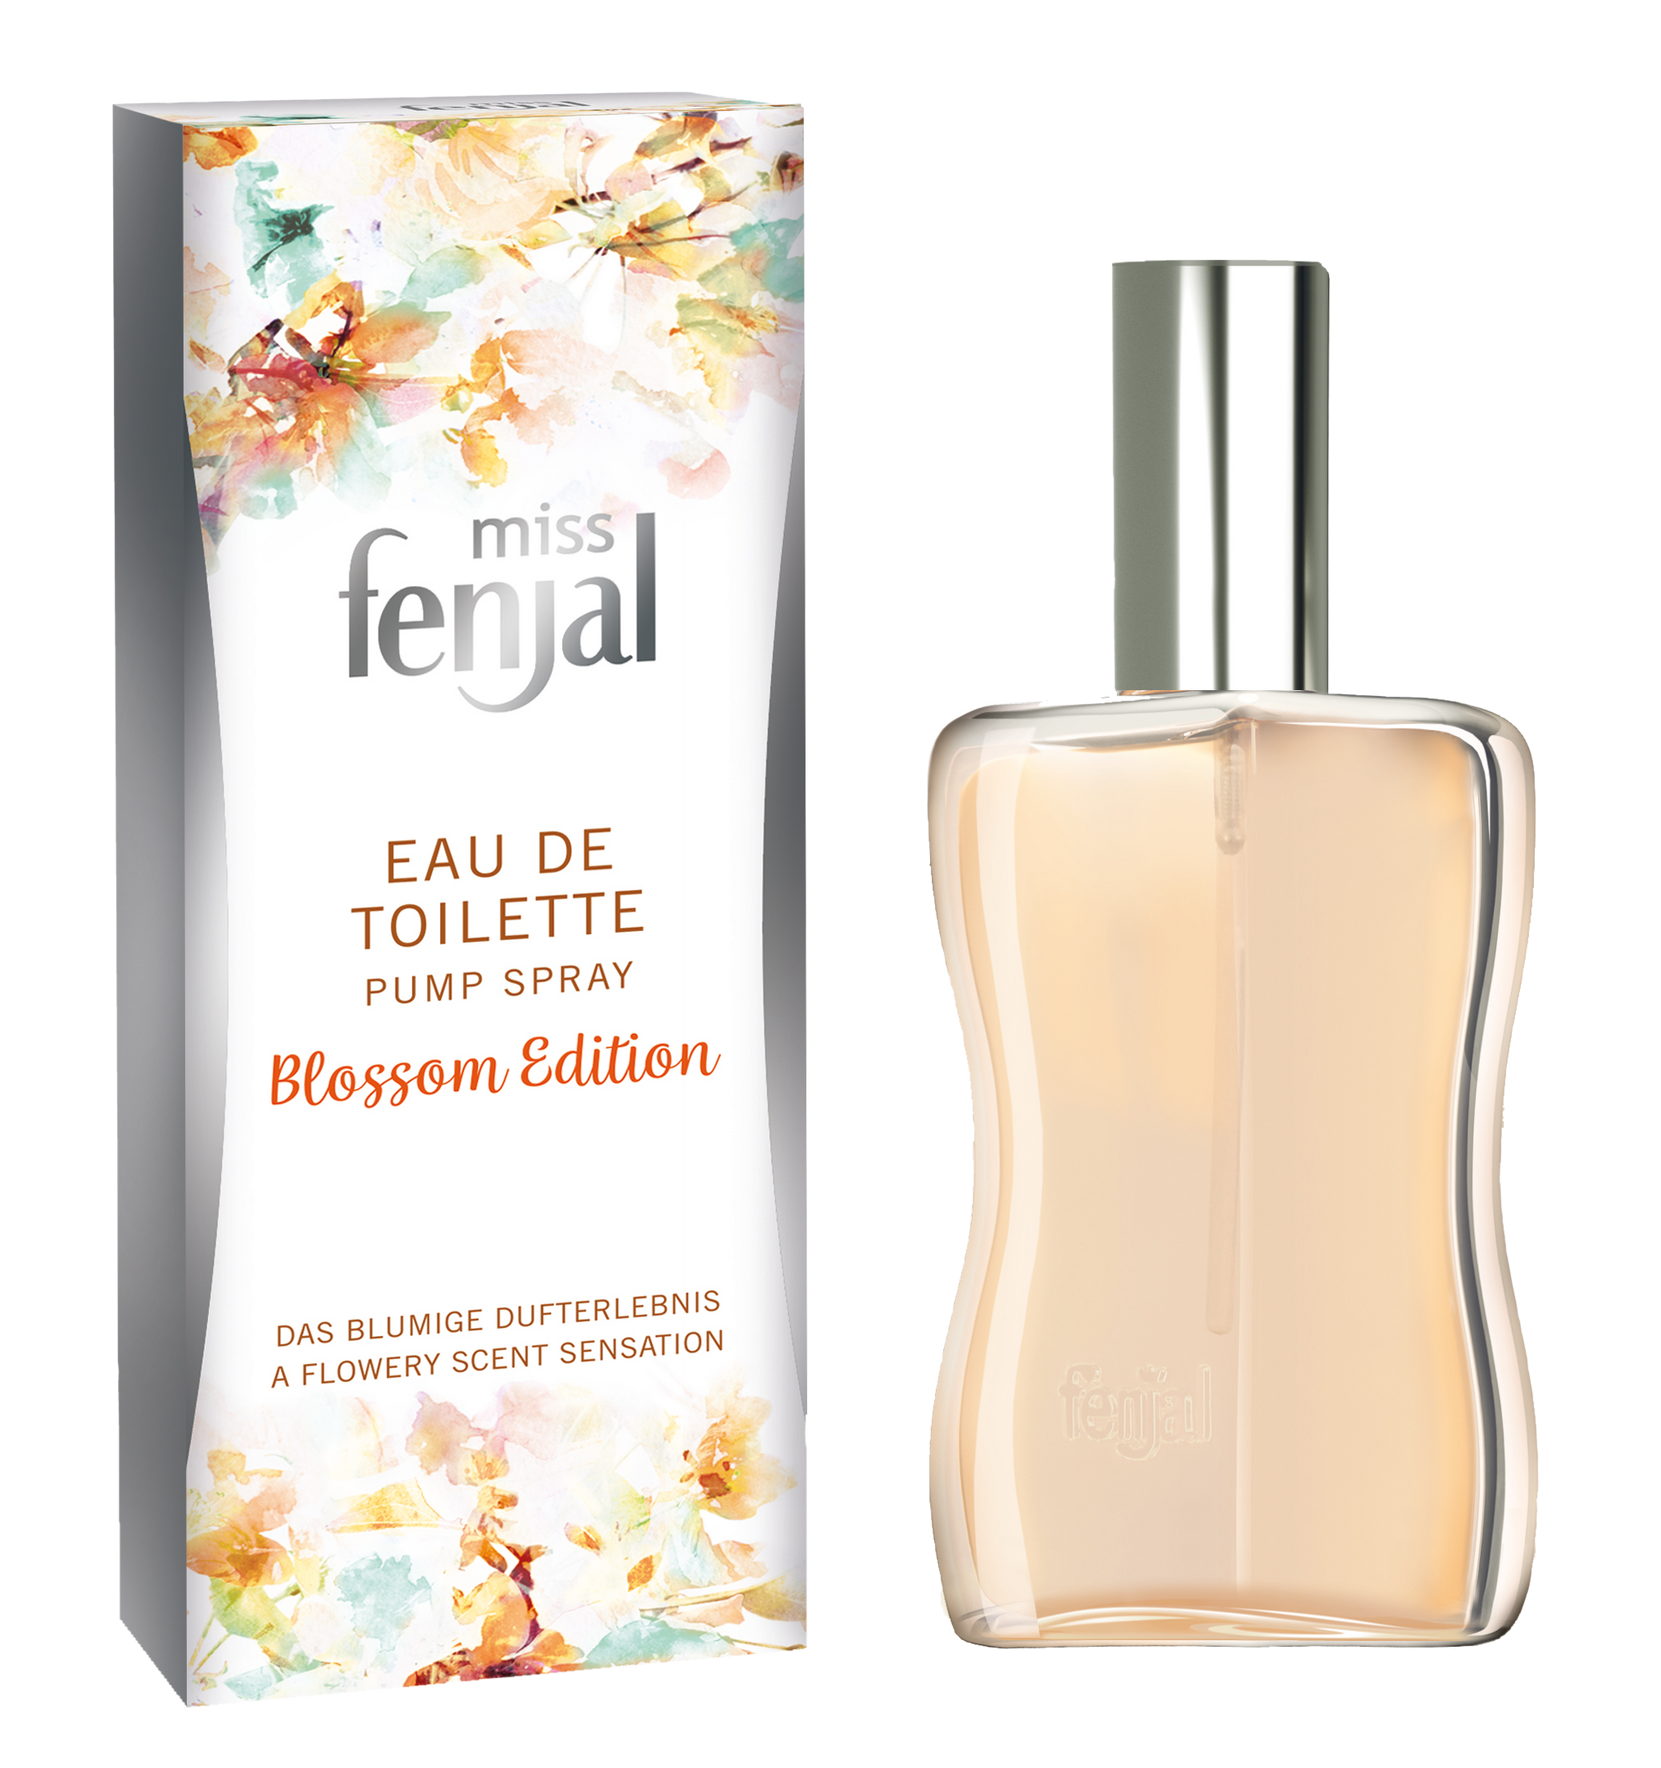 Miss Fenjal EdT Blossom Edition 50 ml, Fenjal